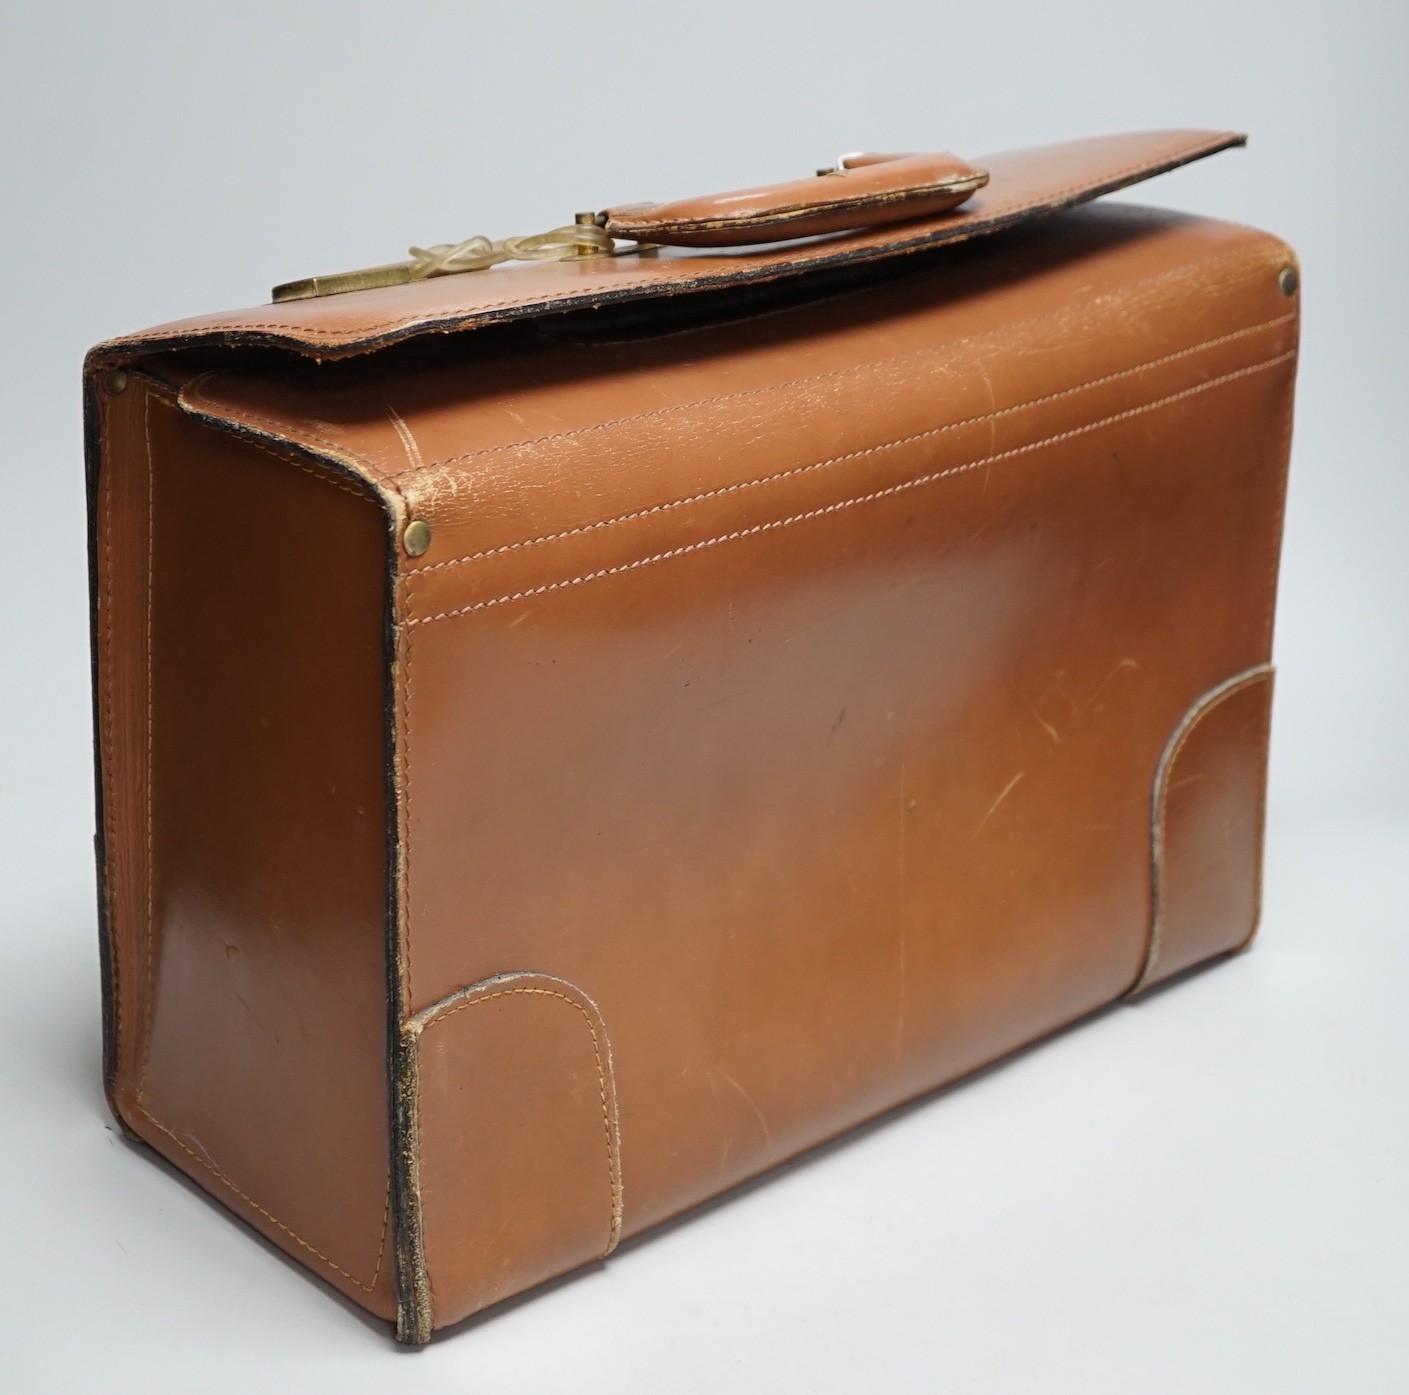 A leather case, proprorted to have once belonged to Roger Daltrey of The Who, with Tidal Wave Productions label                                                                                                             